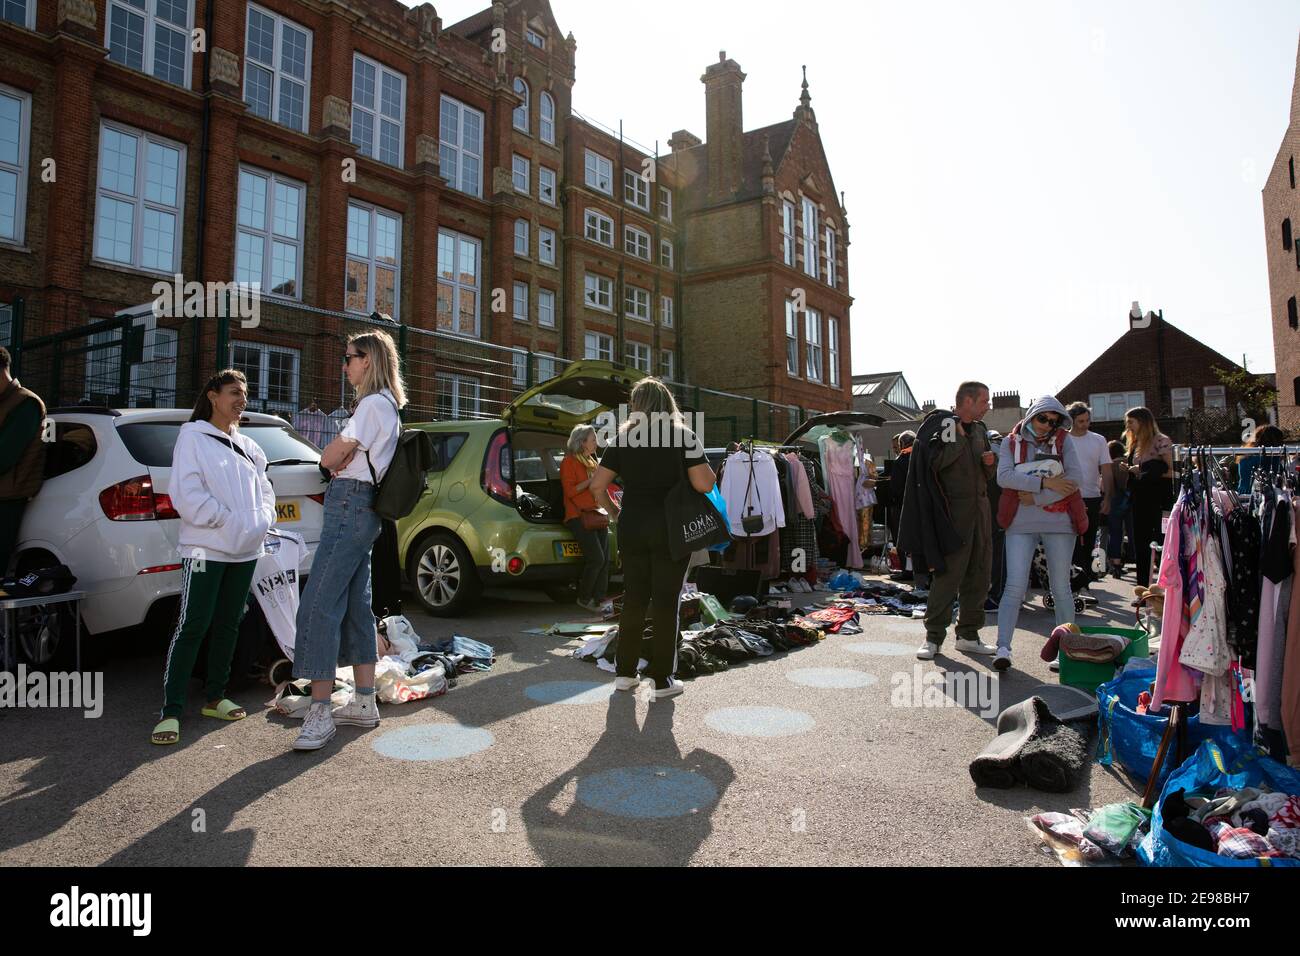 Fashion and style images of Hipsters at Dalston Boot sale during Covid pandemic Stock Photo